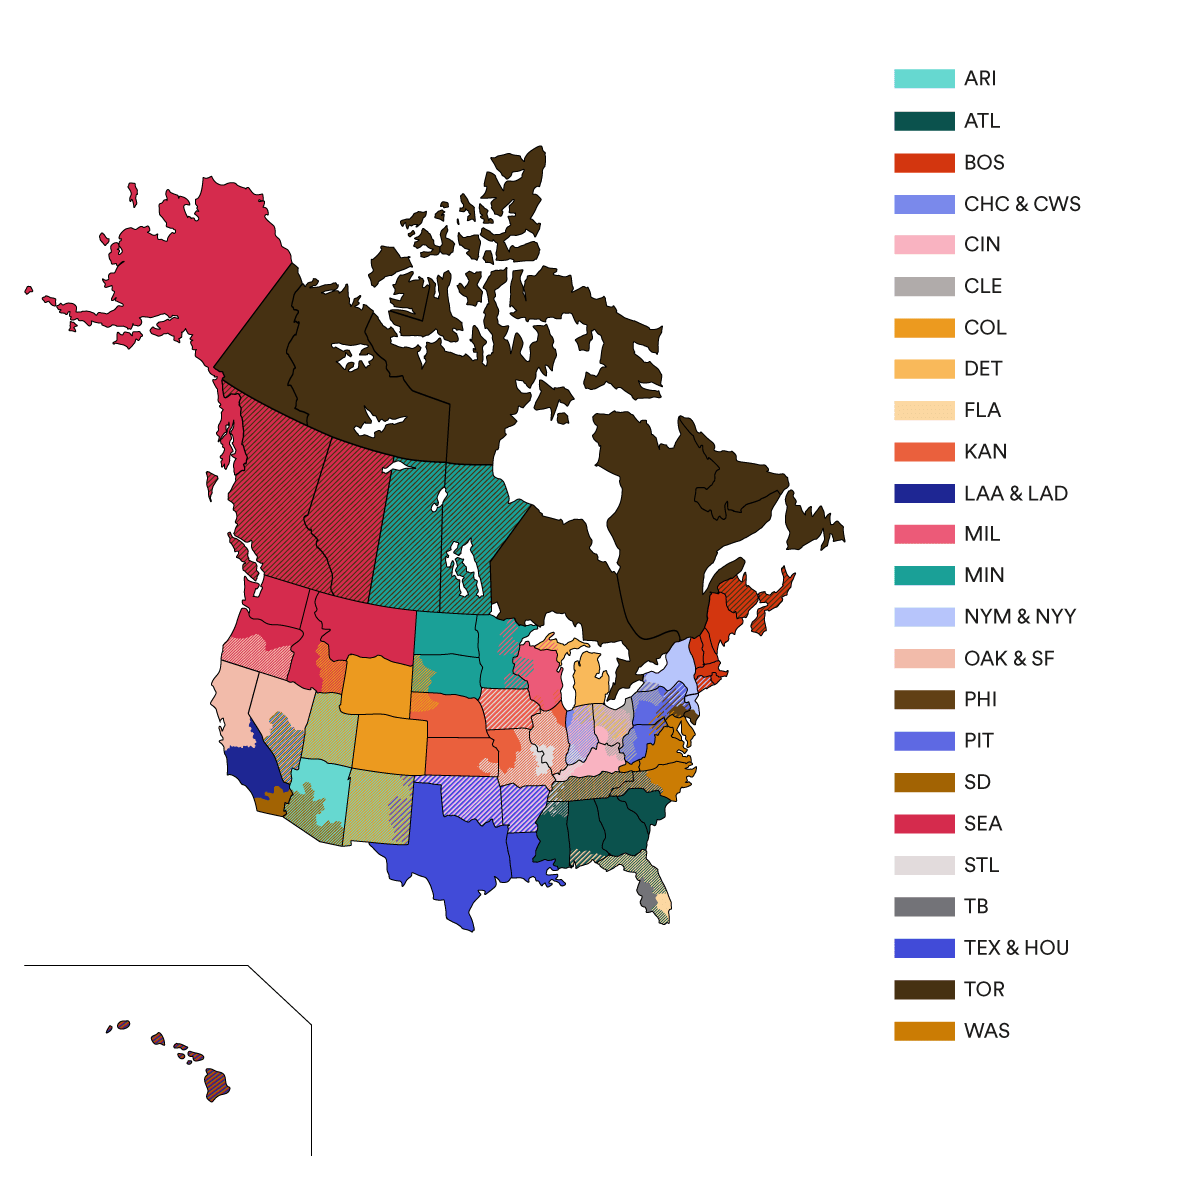 Map showing all MLB blackout regions in the United States and Canada